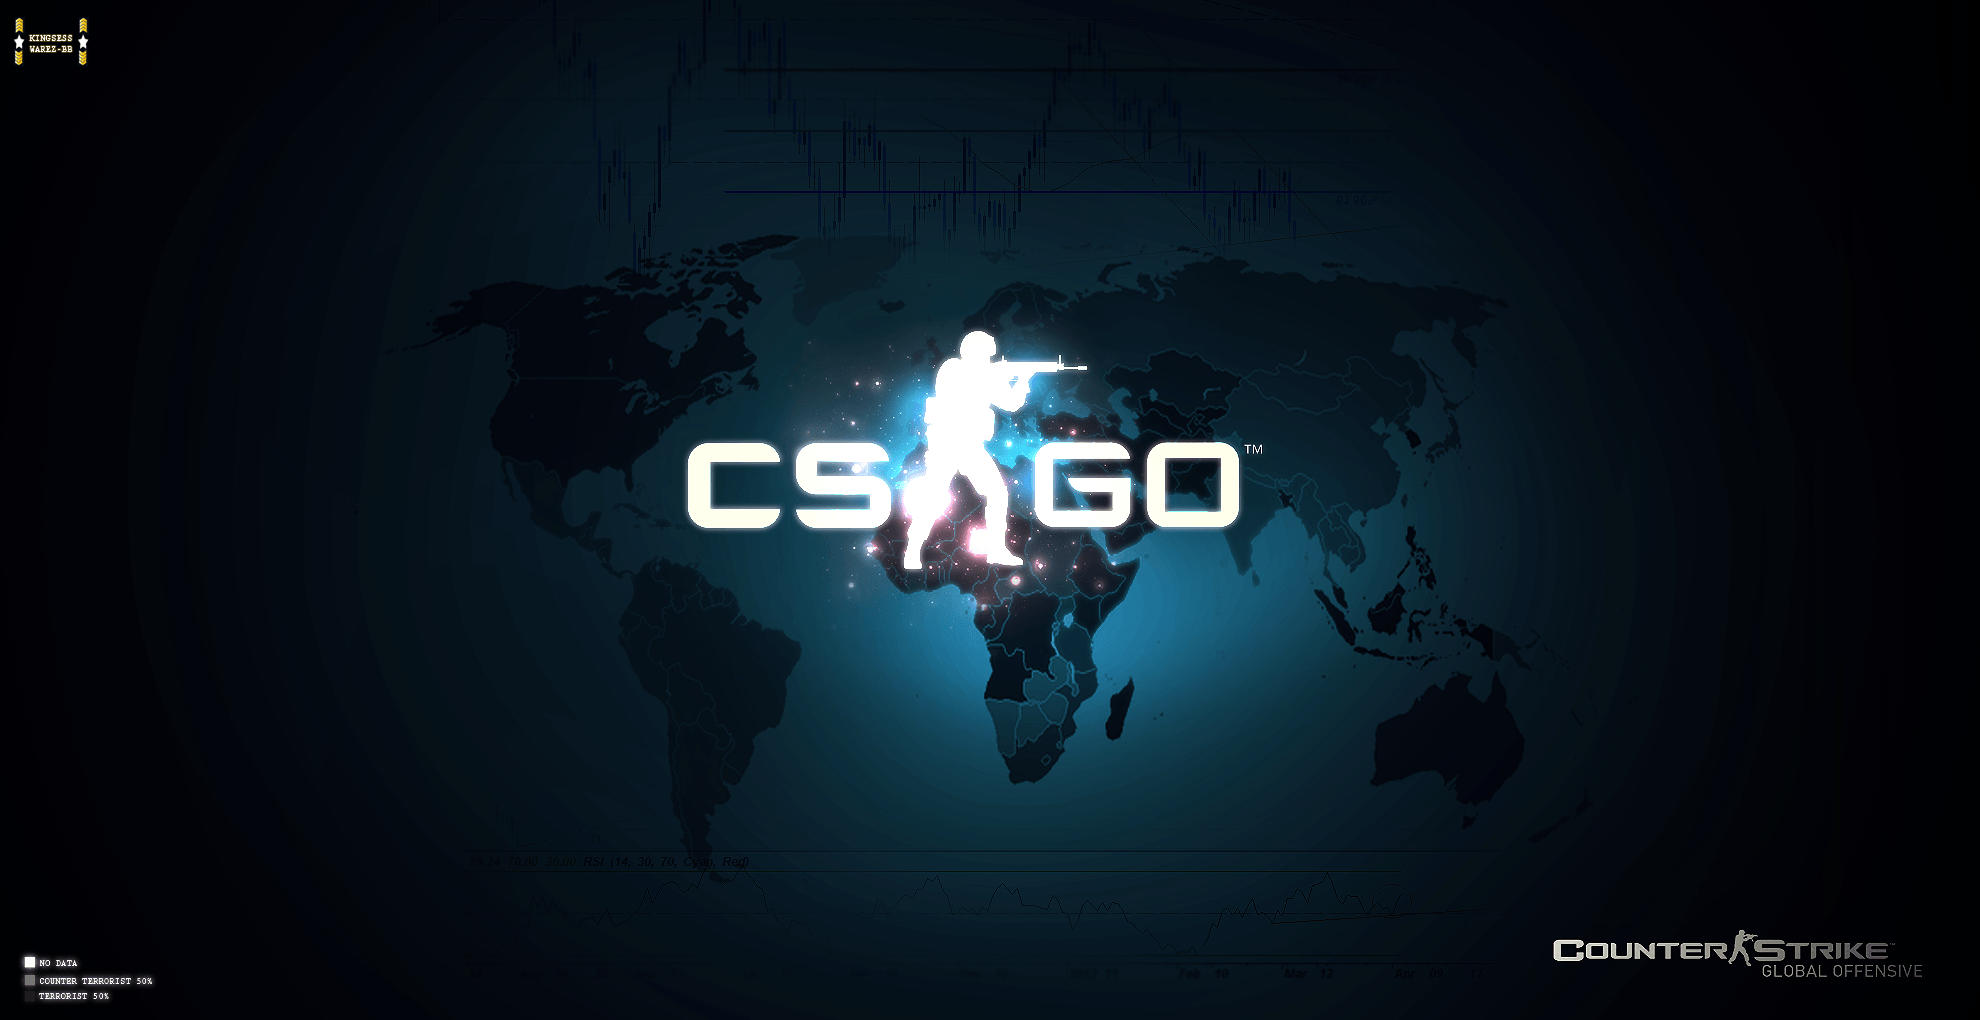 Counter Strike Wallpapers